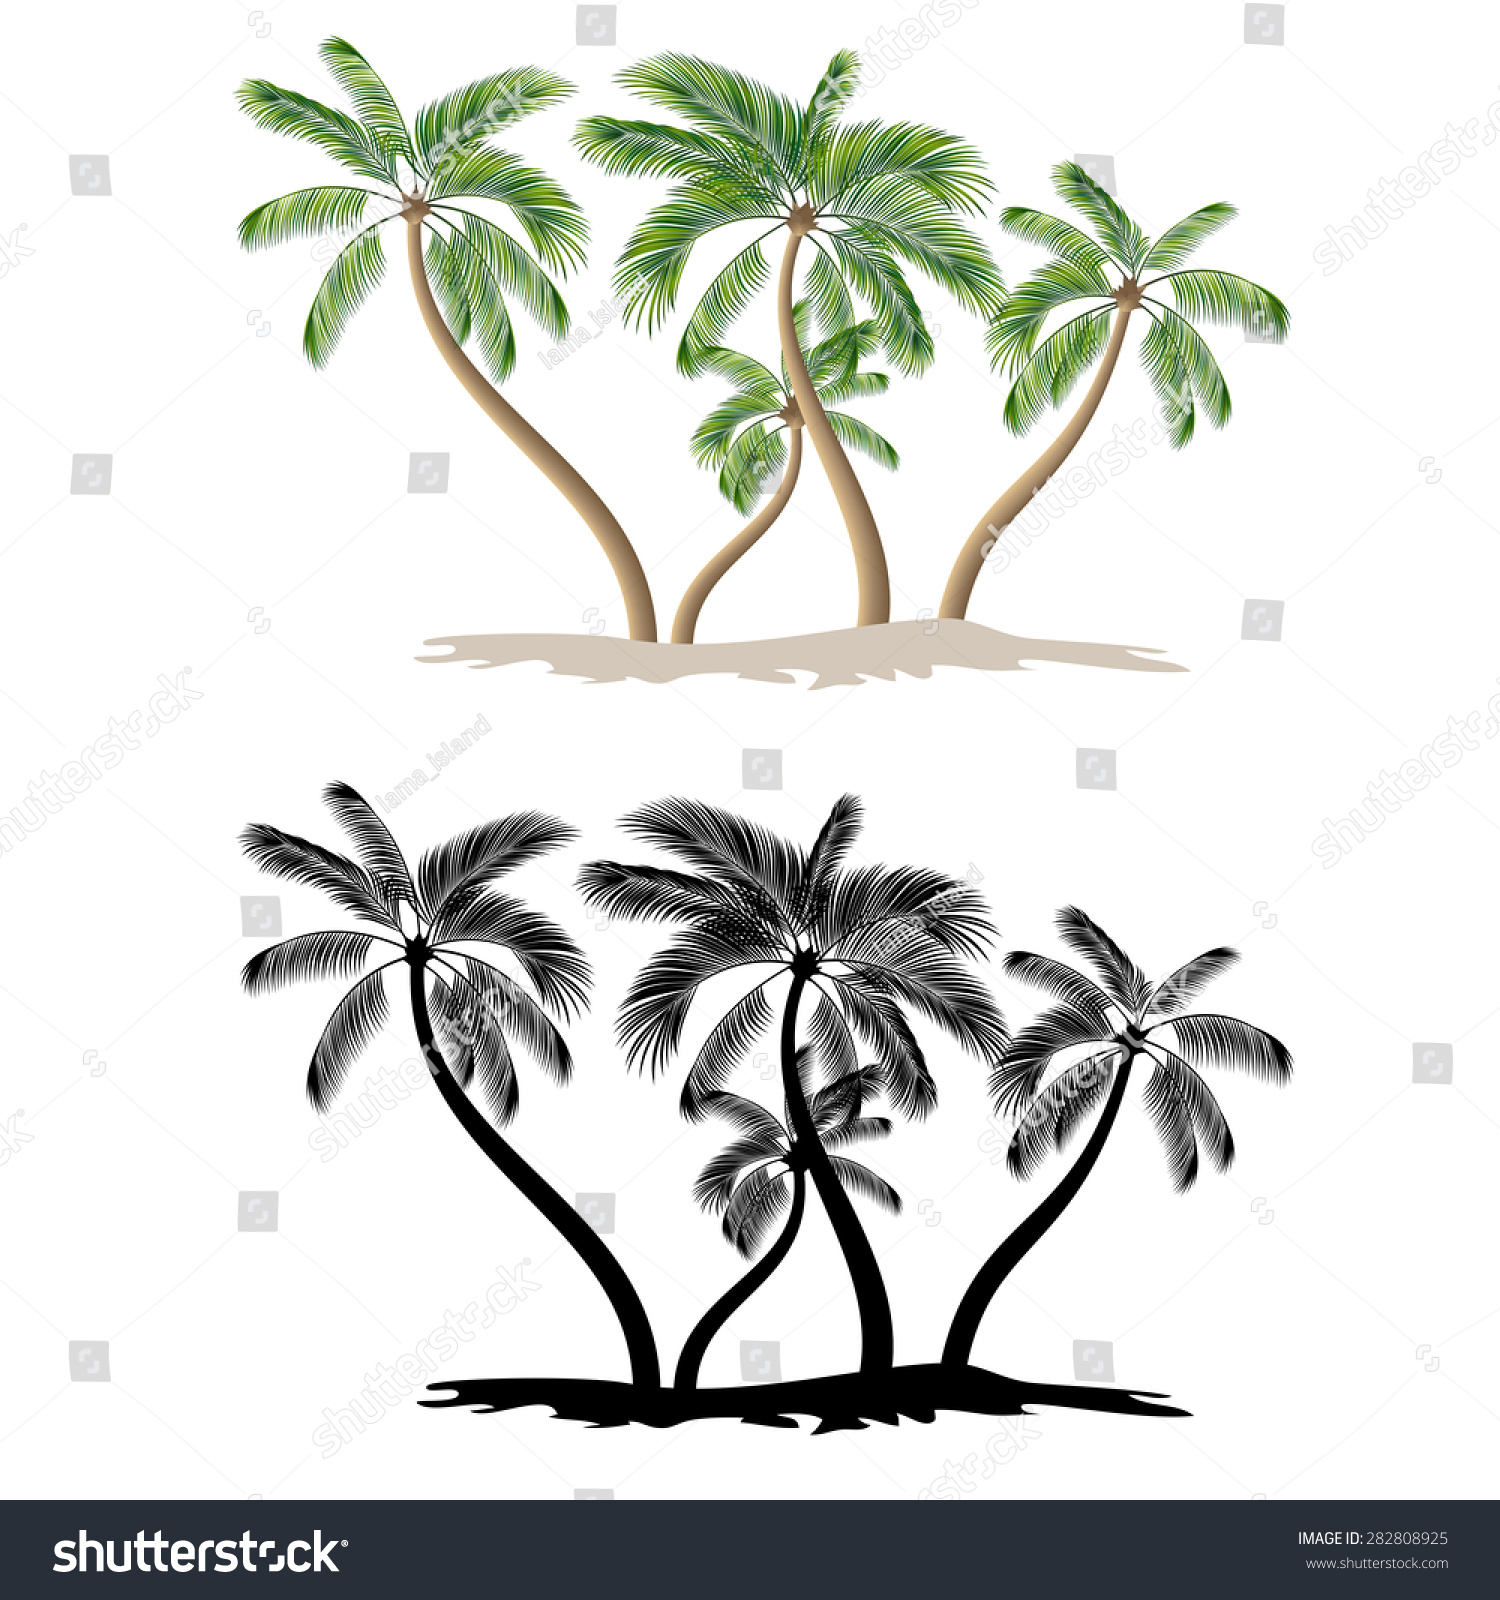 Palm Tree Isolated On White Background Stock Vector Illustration